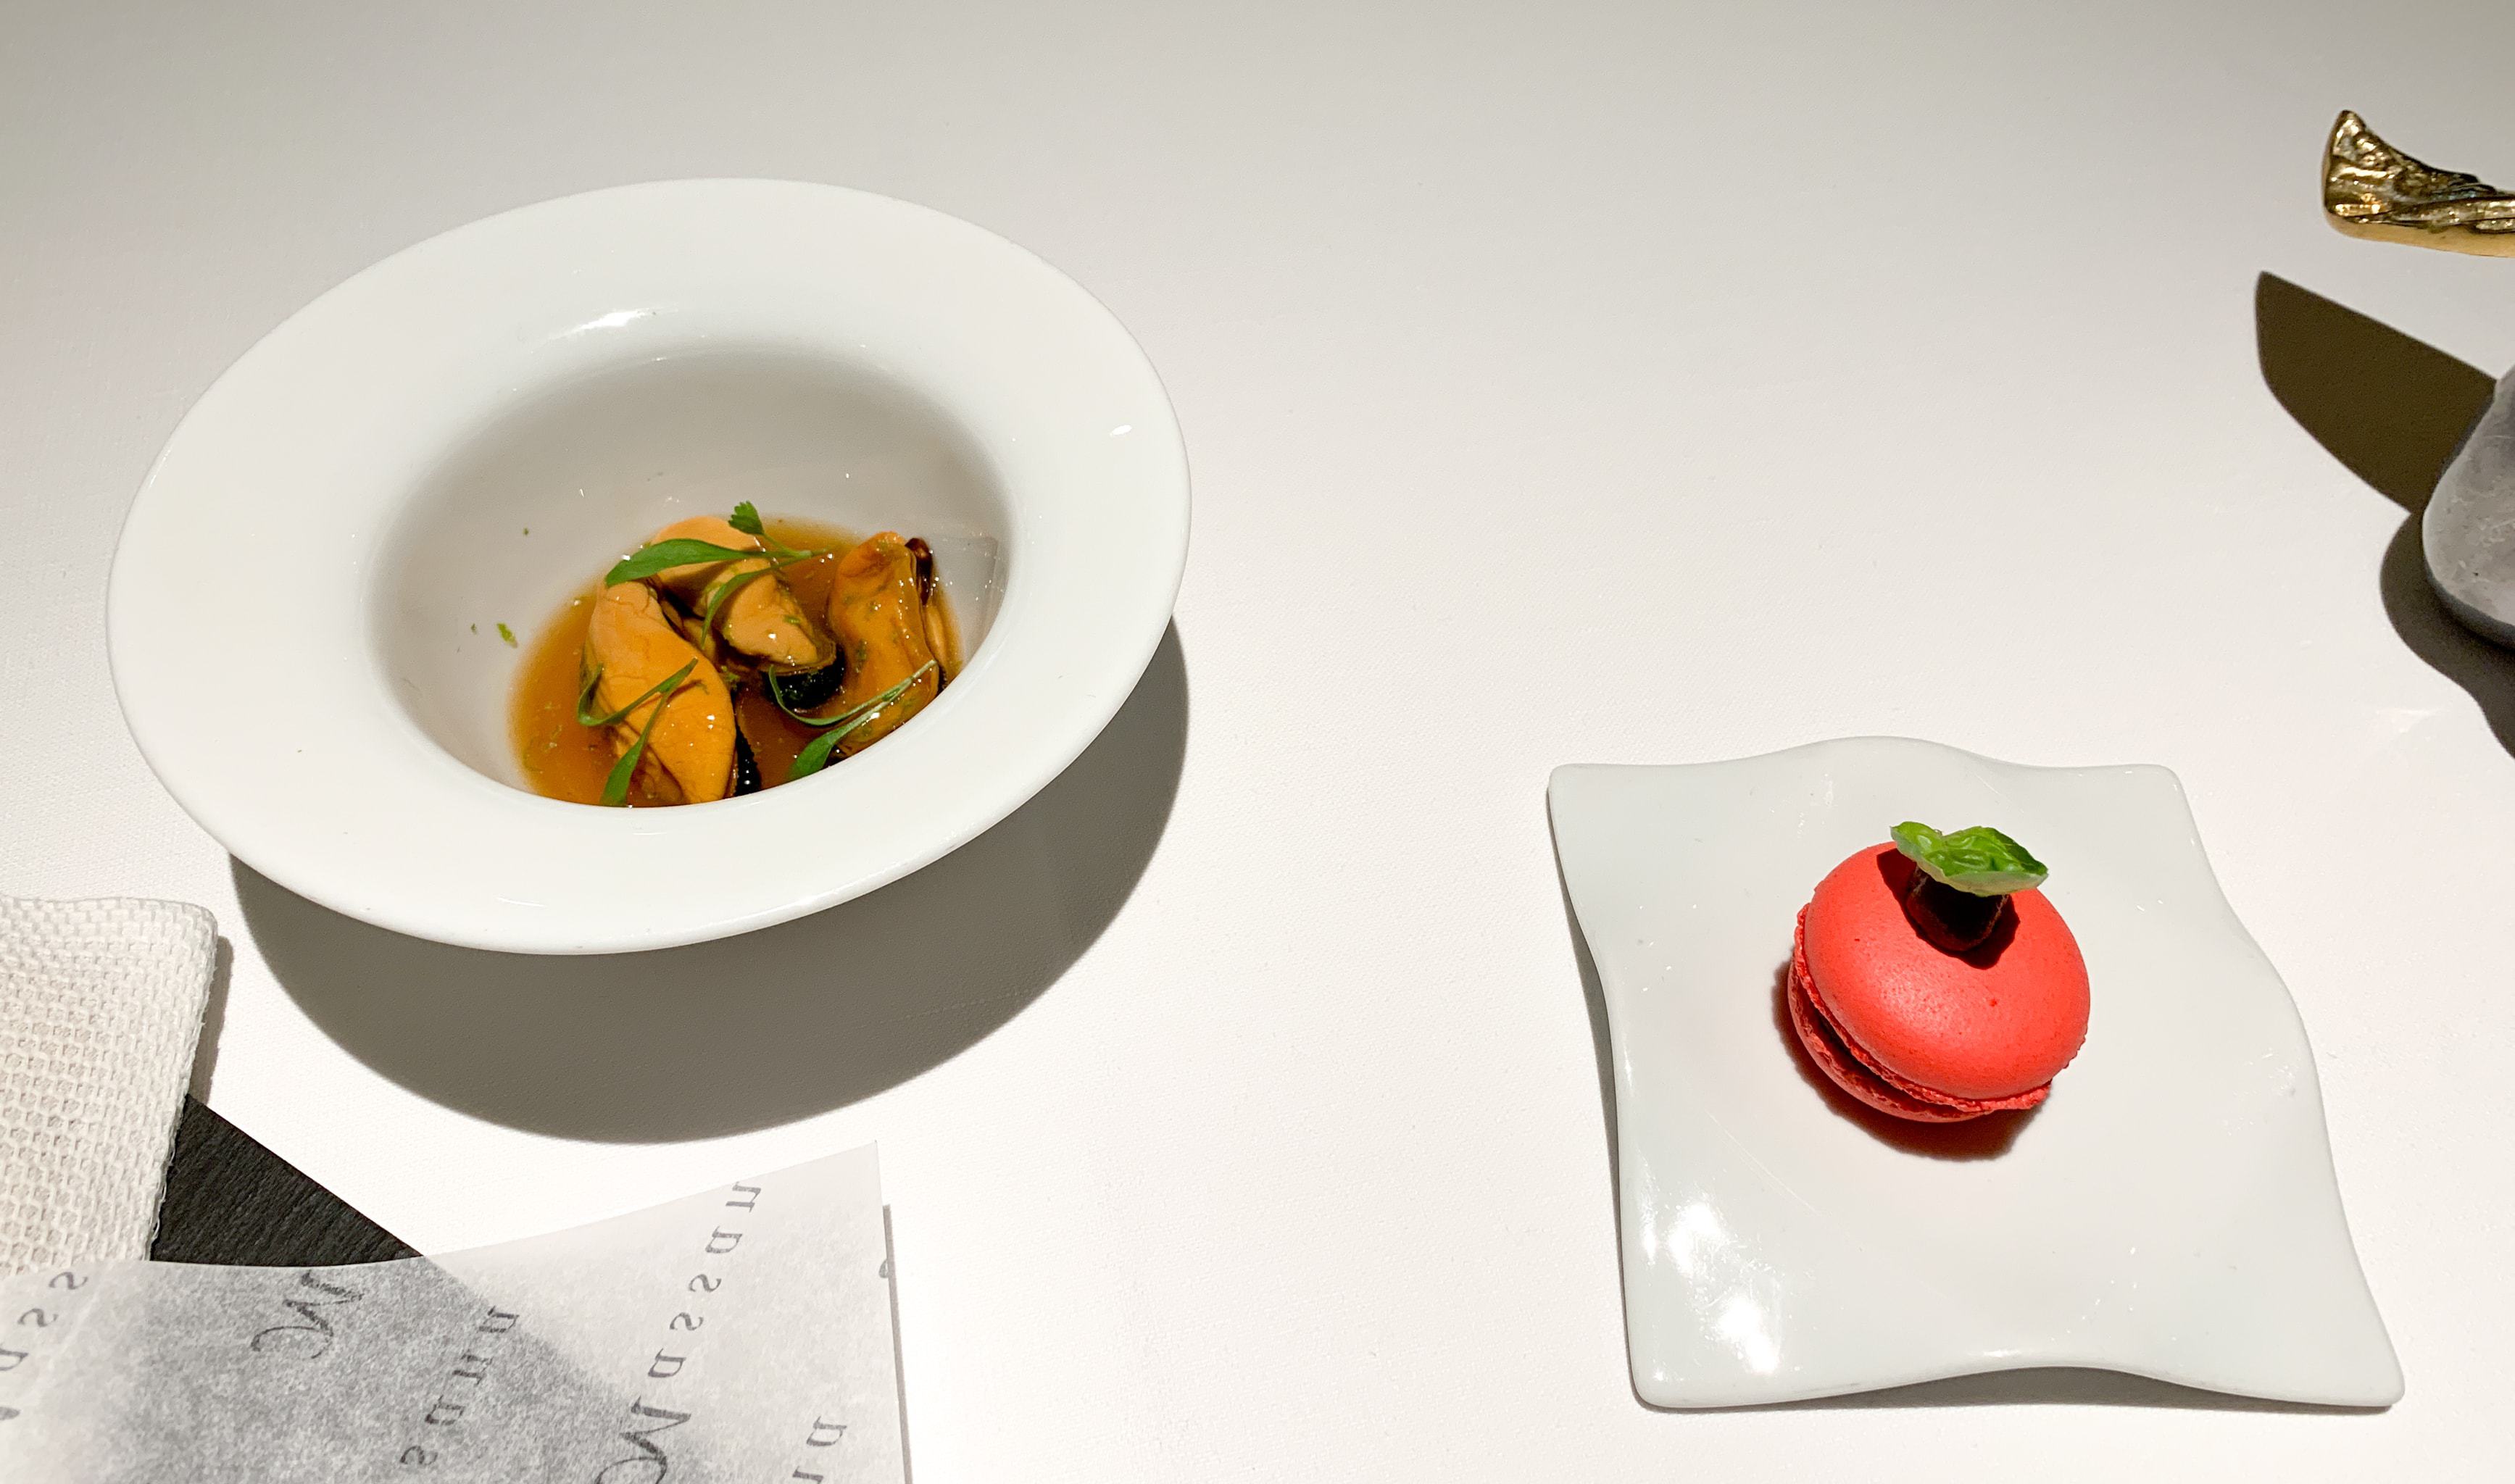 Marinated mussels, lime, and coriander (left), and "Macaron" caprese (right)